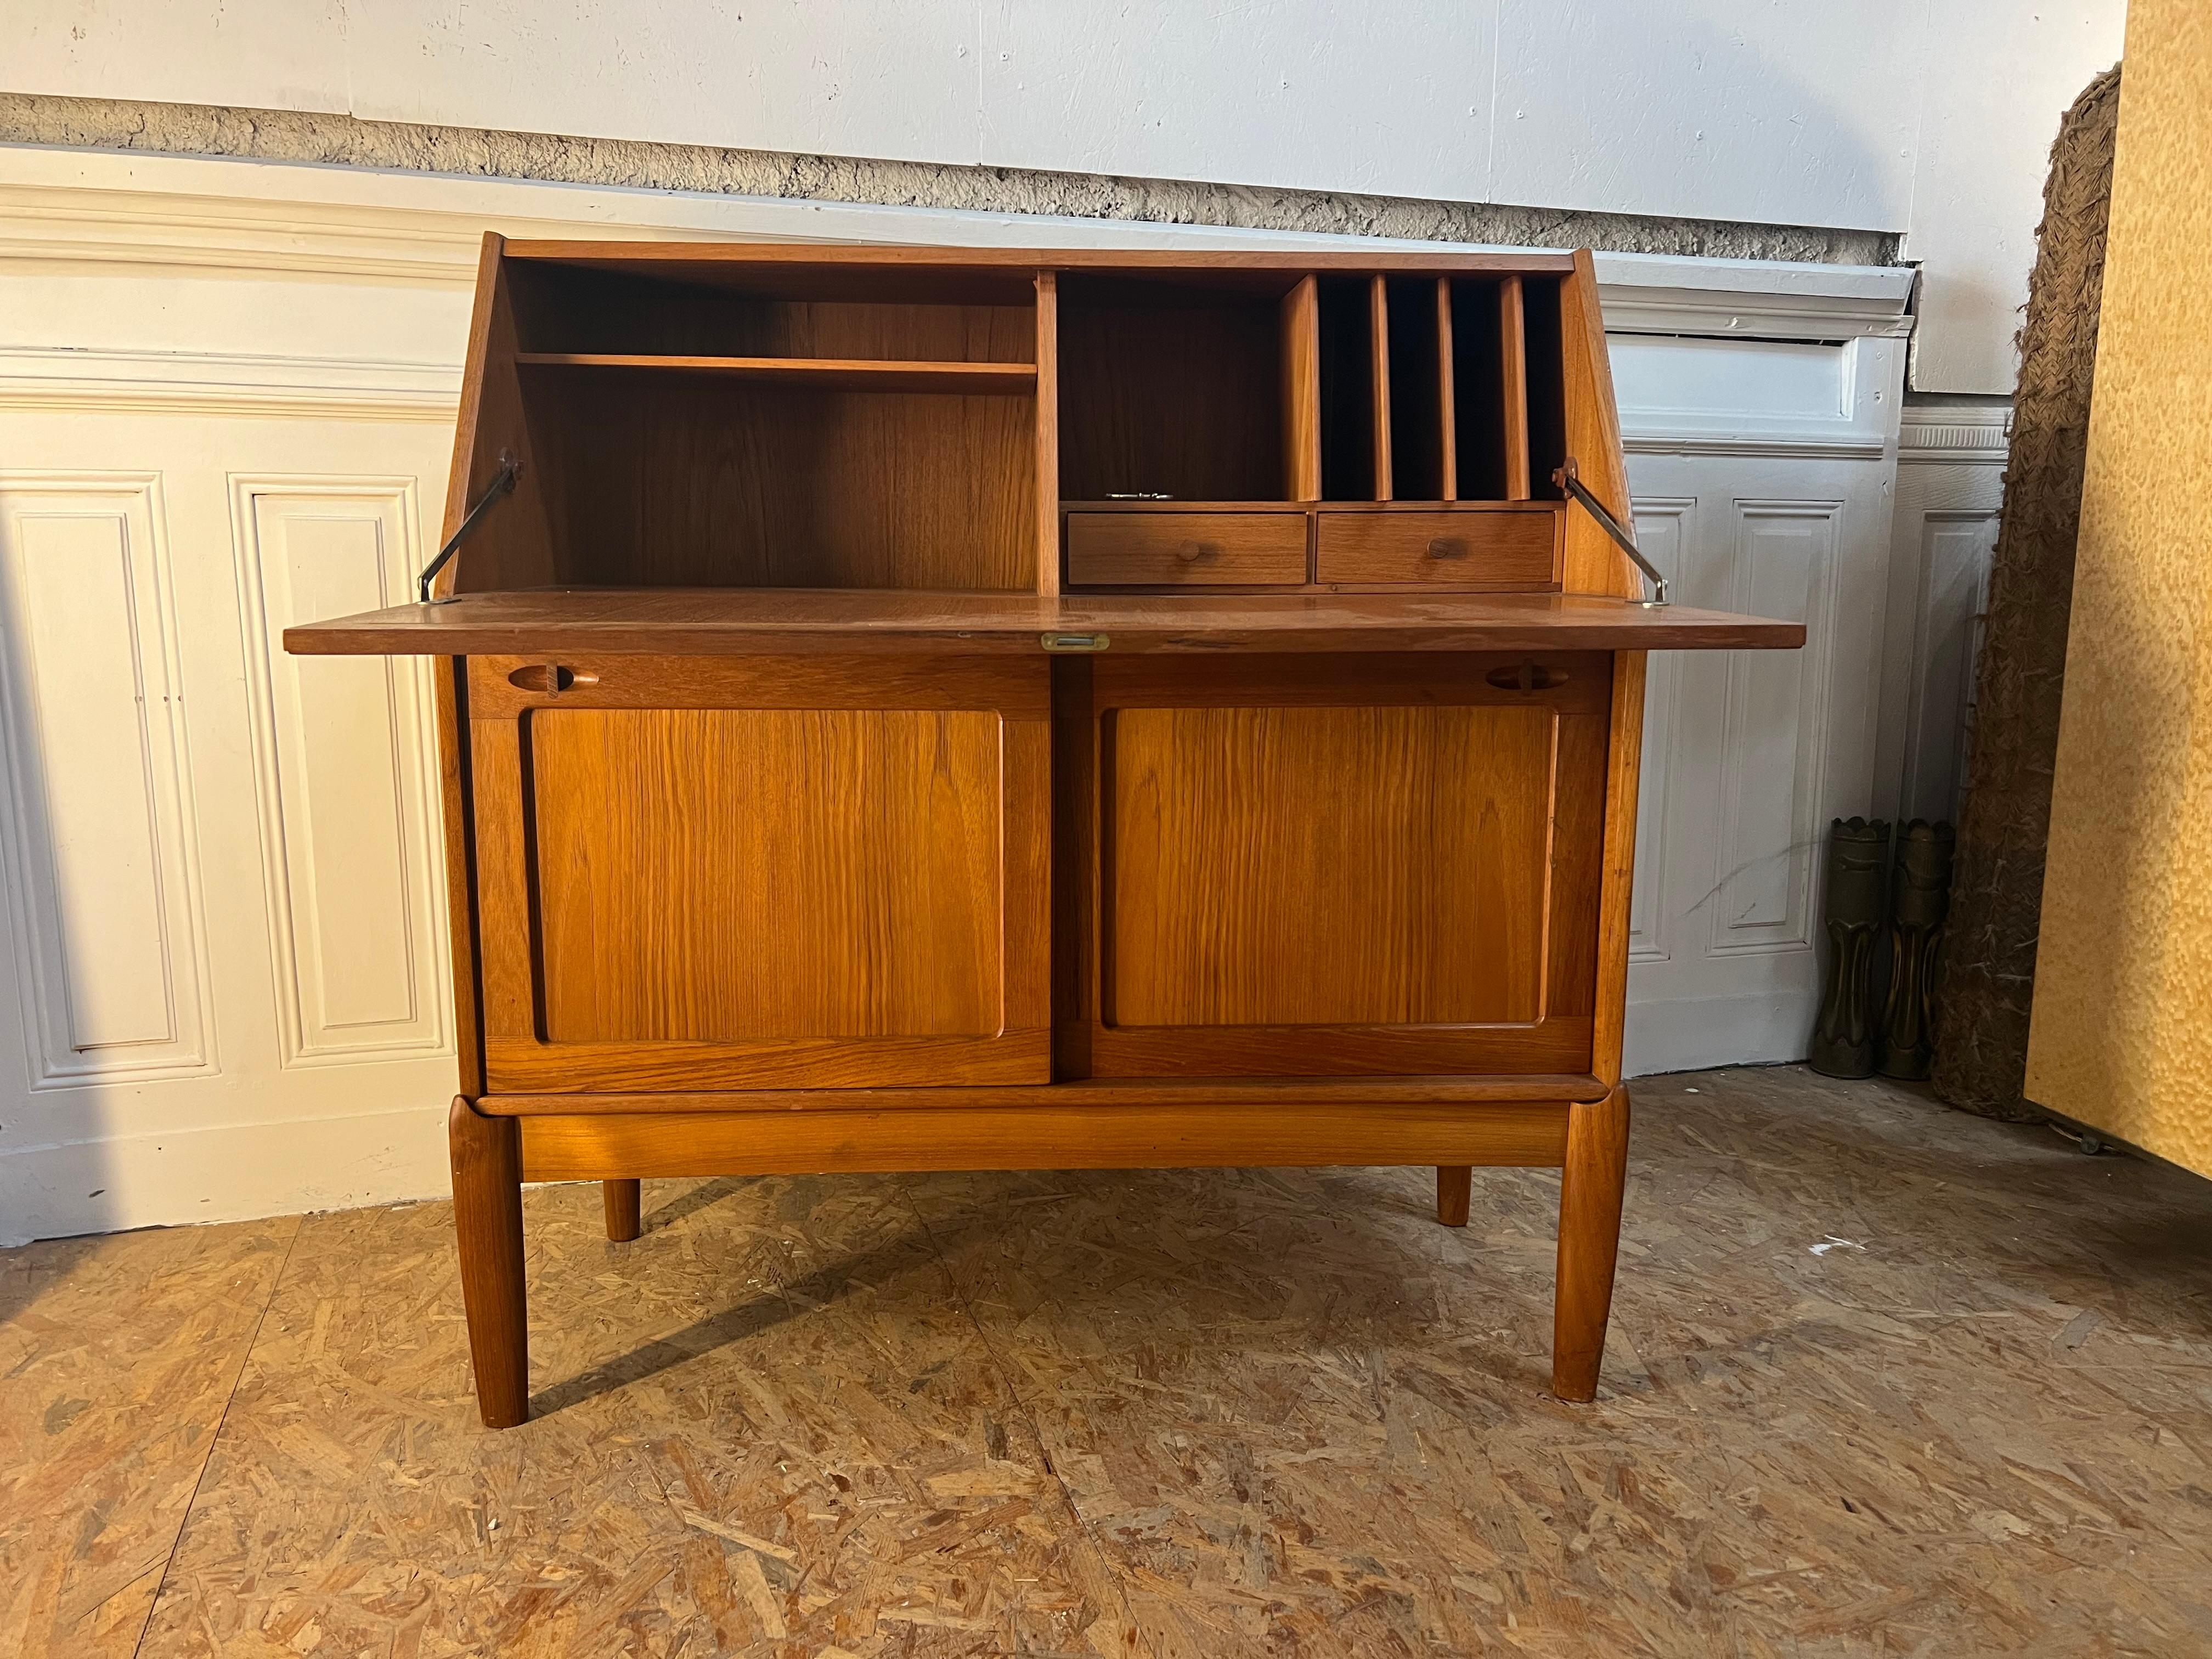  

This beautiful high quality finished Danish compact writing desk cabinet is designed by H.W. Klein for Bramin in the 1960s. It features an extendable writing surface. The teak wooden structure shows an overall warm glow in its wonderful